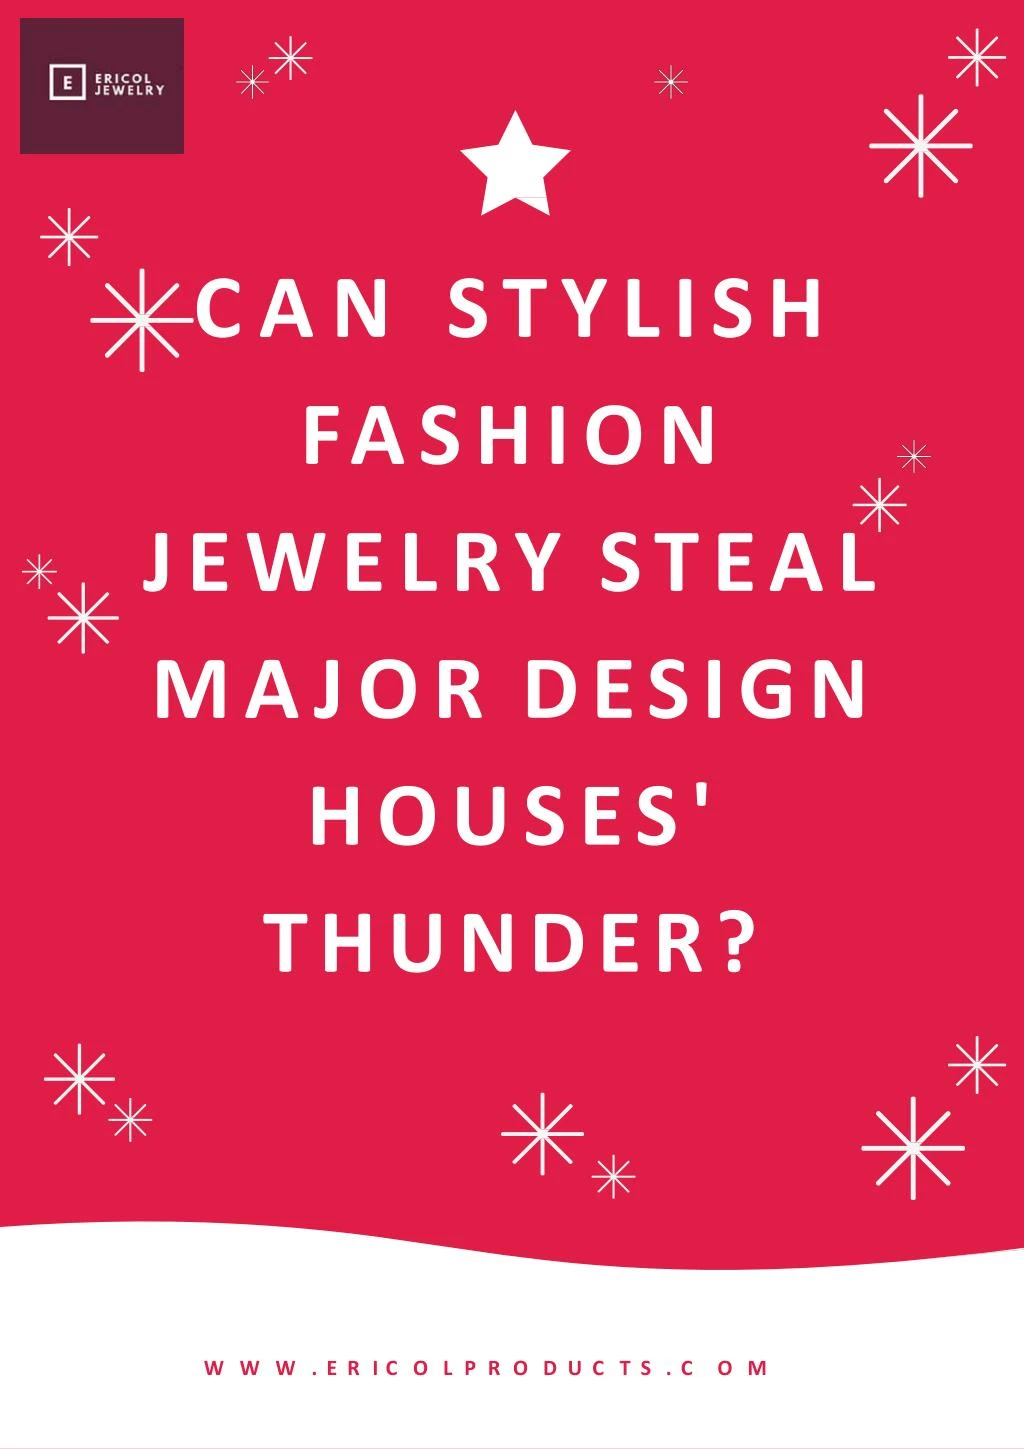 can stylish fashion jewelry steal major design